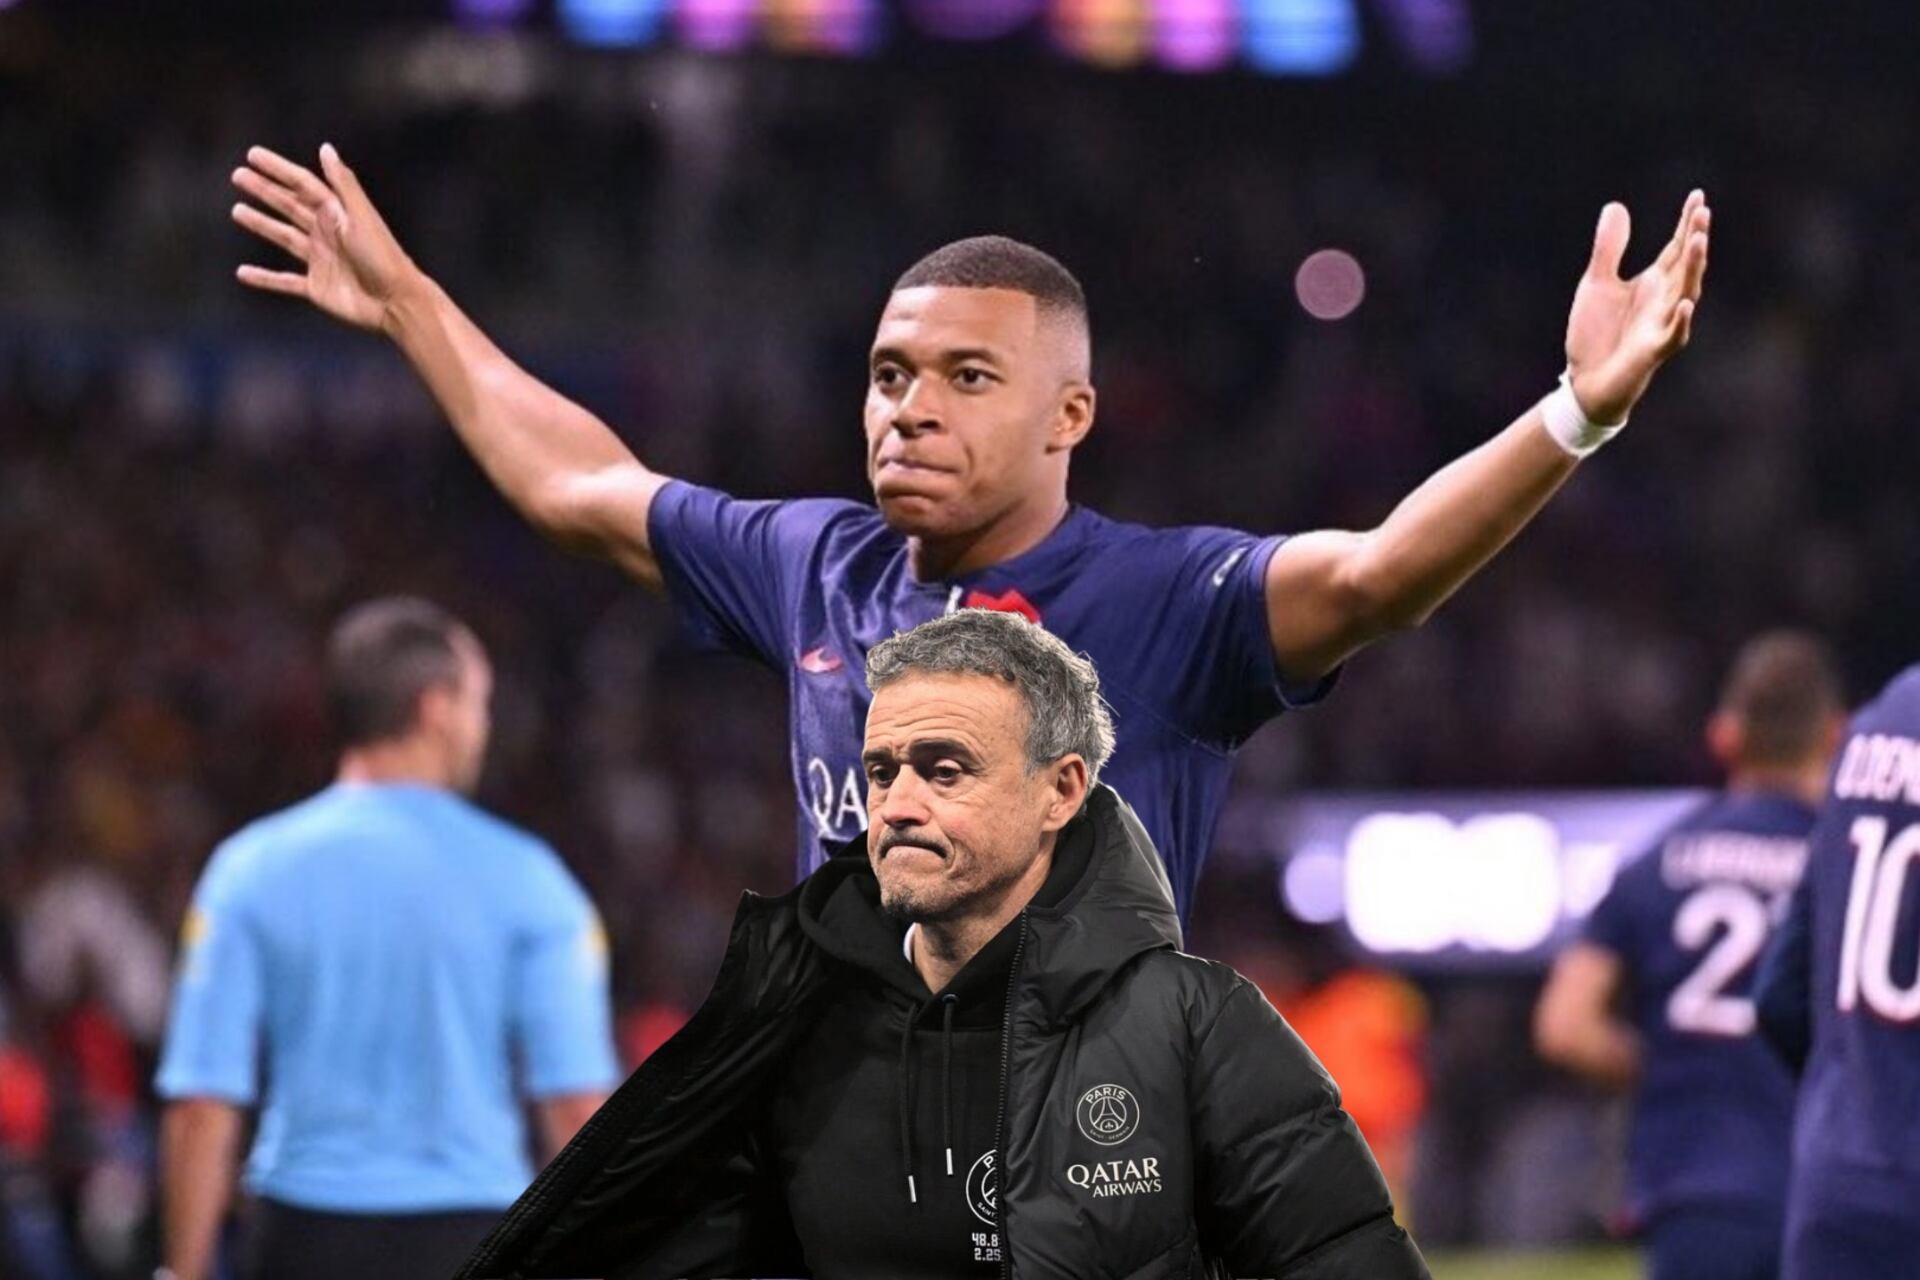 (VIDEO) The most curious answer about Mbappé's future, Luis Enrique was asked about Kylian to Real Madrid & he said this